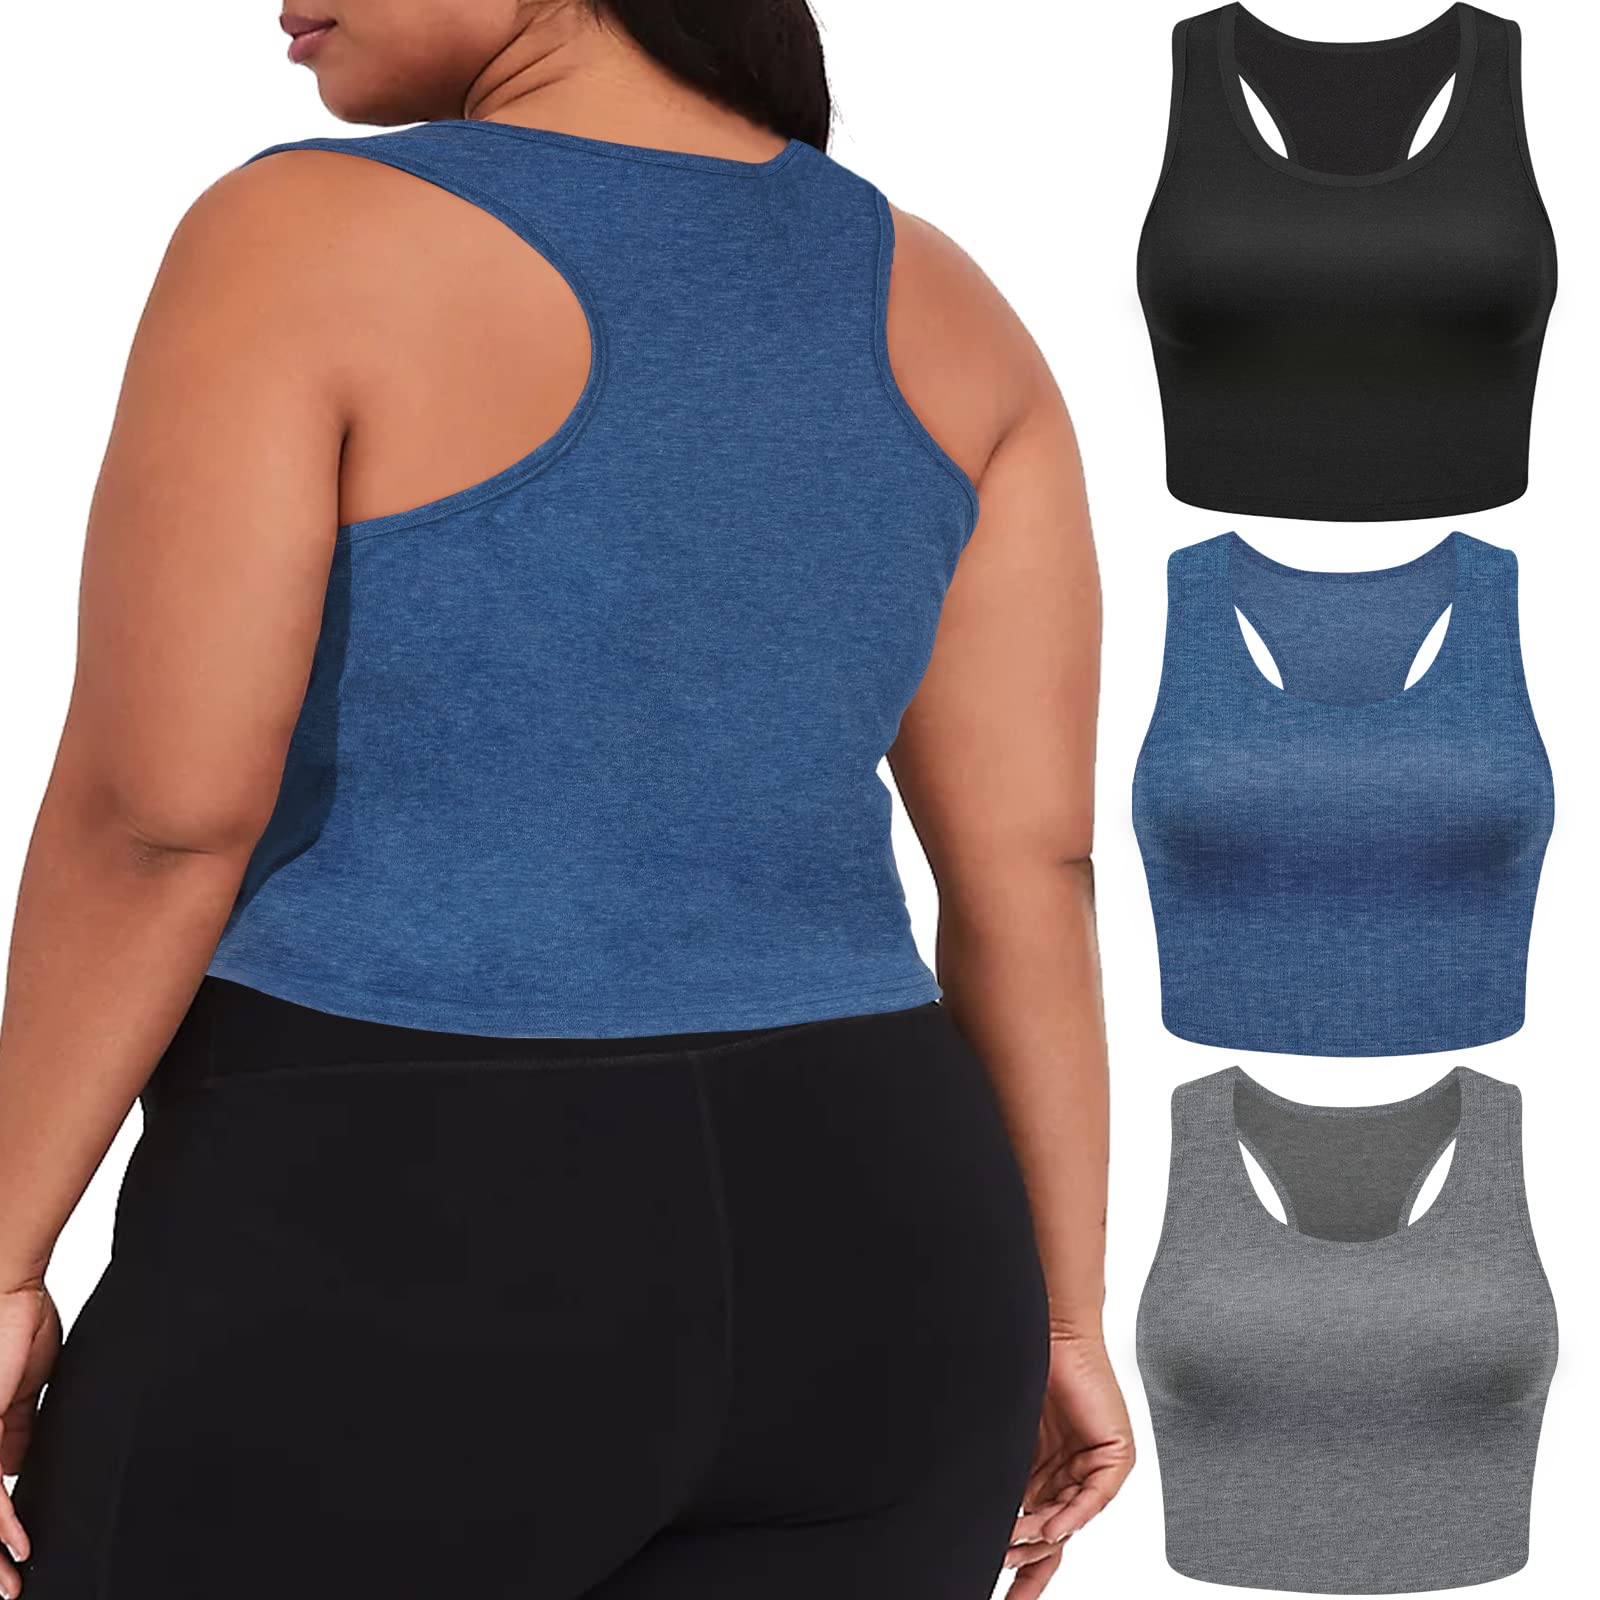 3 Pieces Basic Plus Size Tank Tops for Women-Black,Grey,Navy Blue - Moon Wood